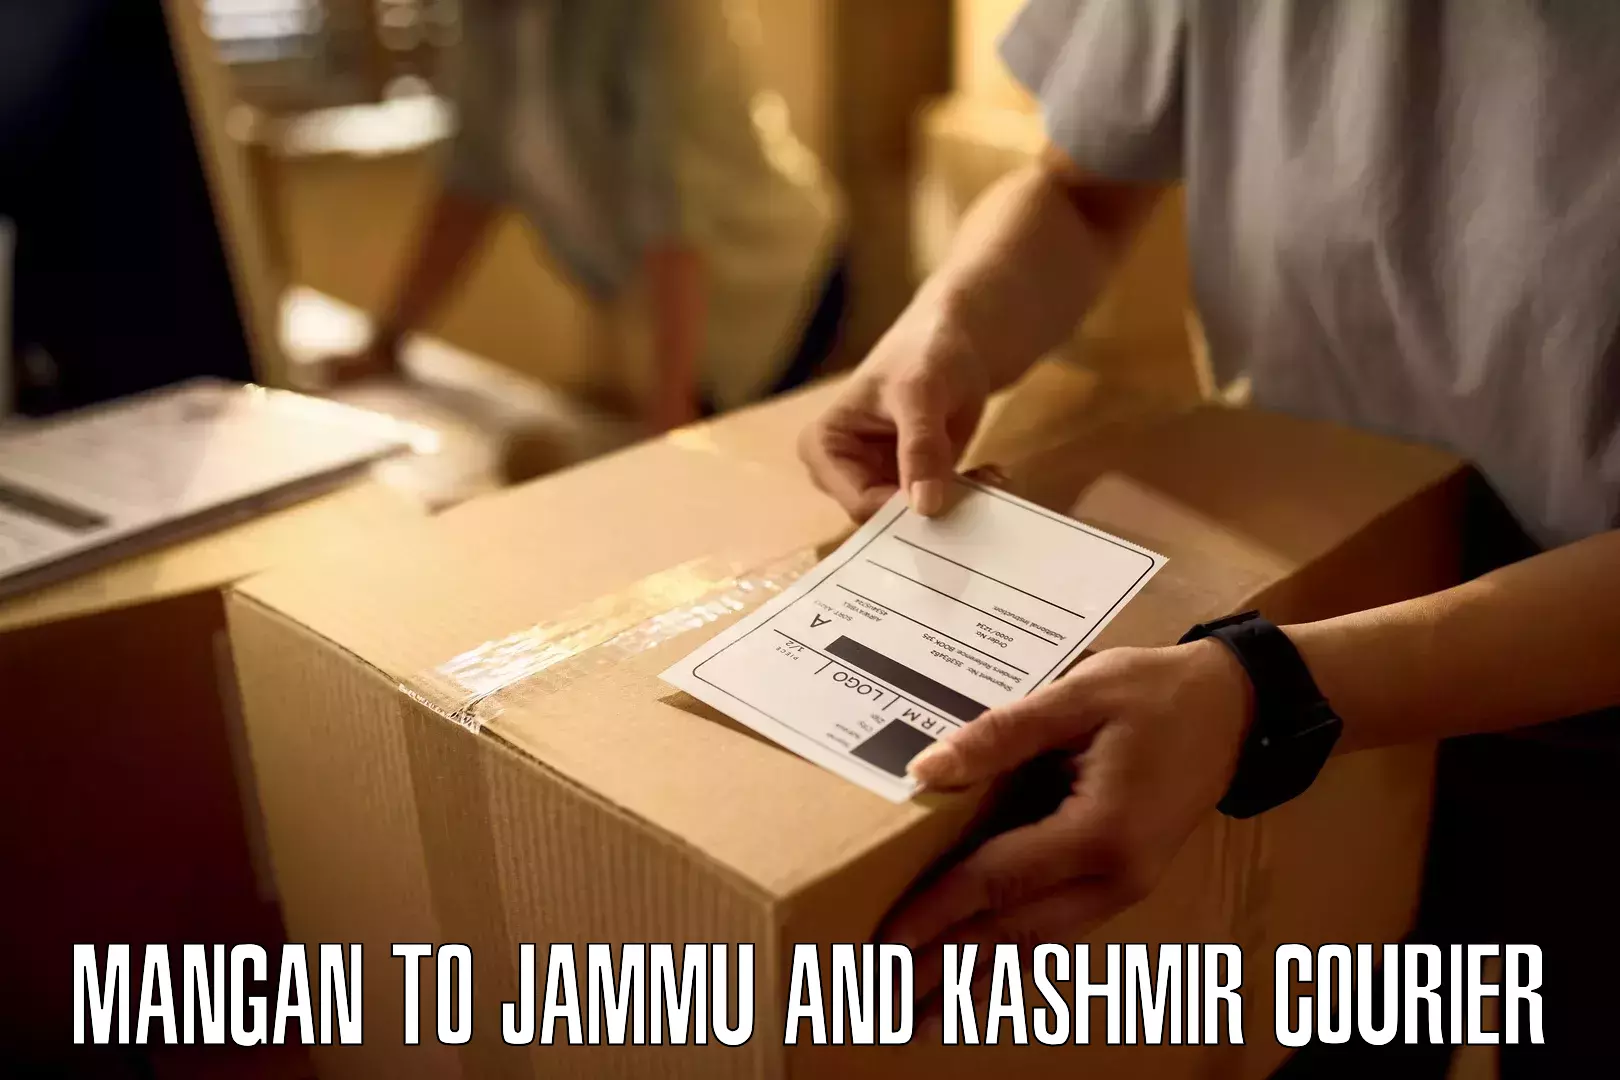 Cash on delivery service Mangan to Jammu